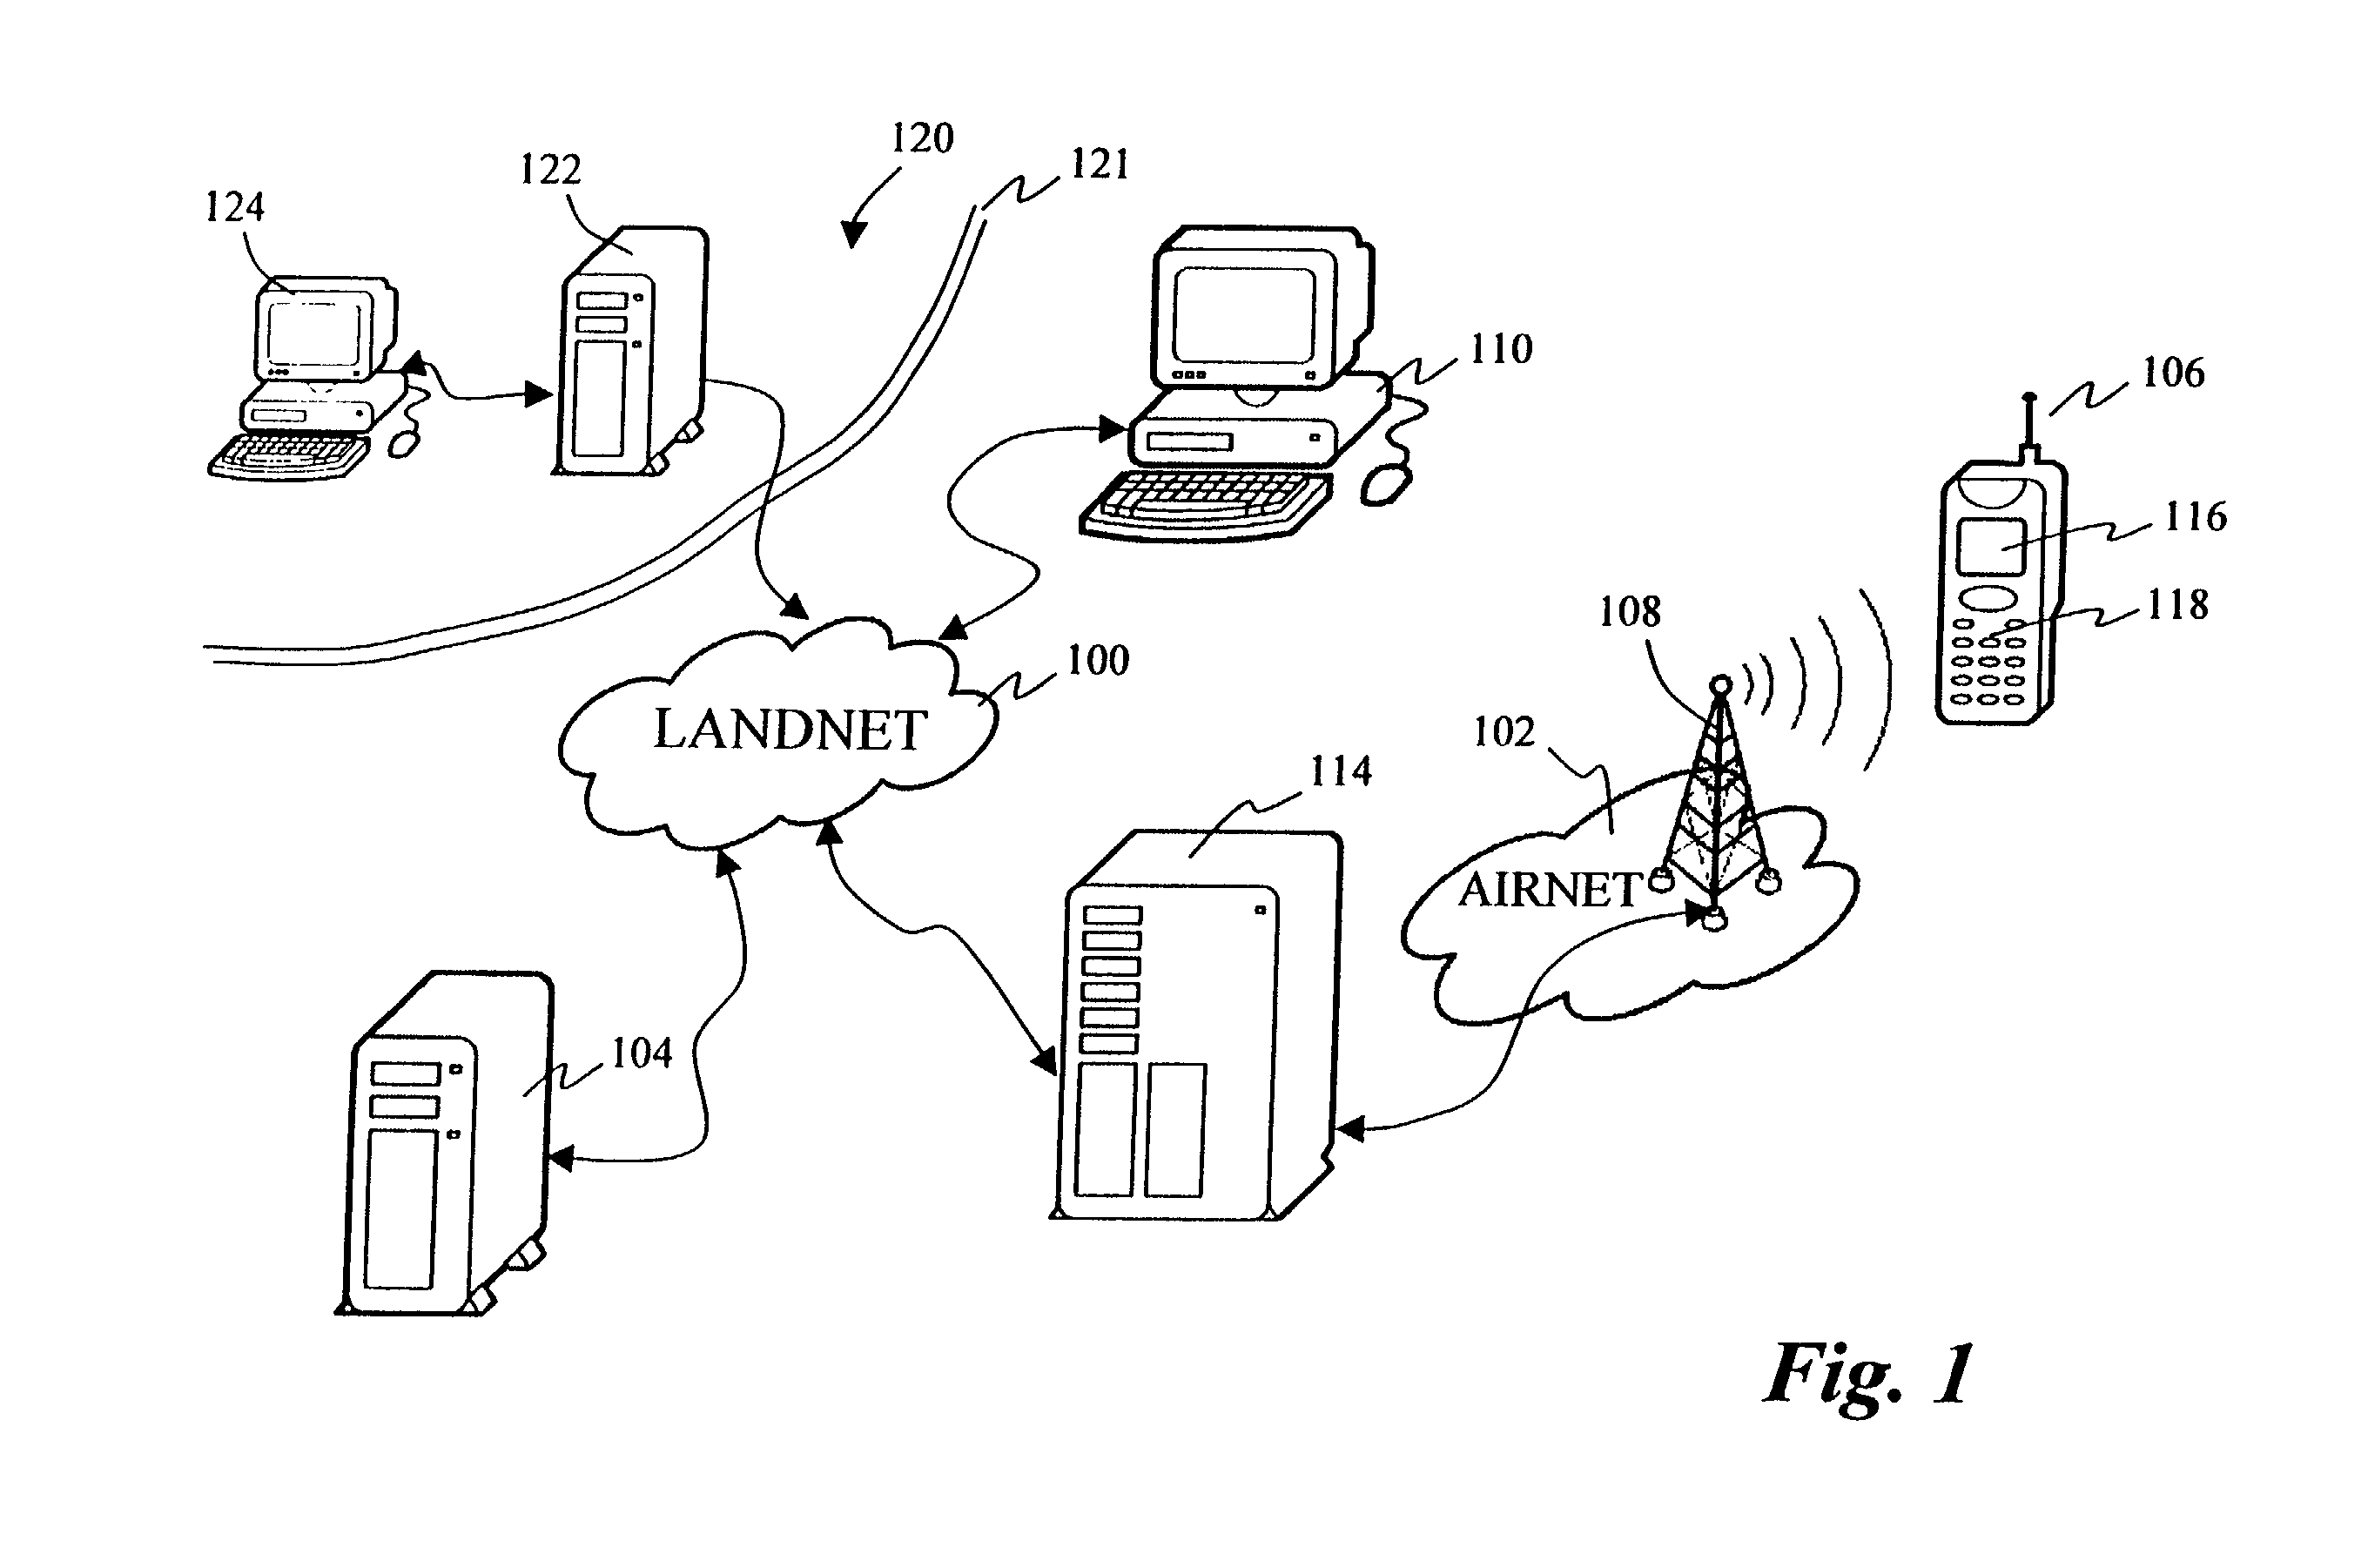 Method and architecture for managing a fleet of mobile stations over wireless data networks